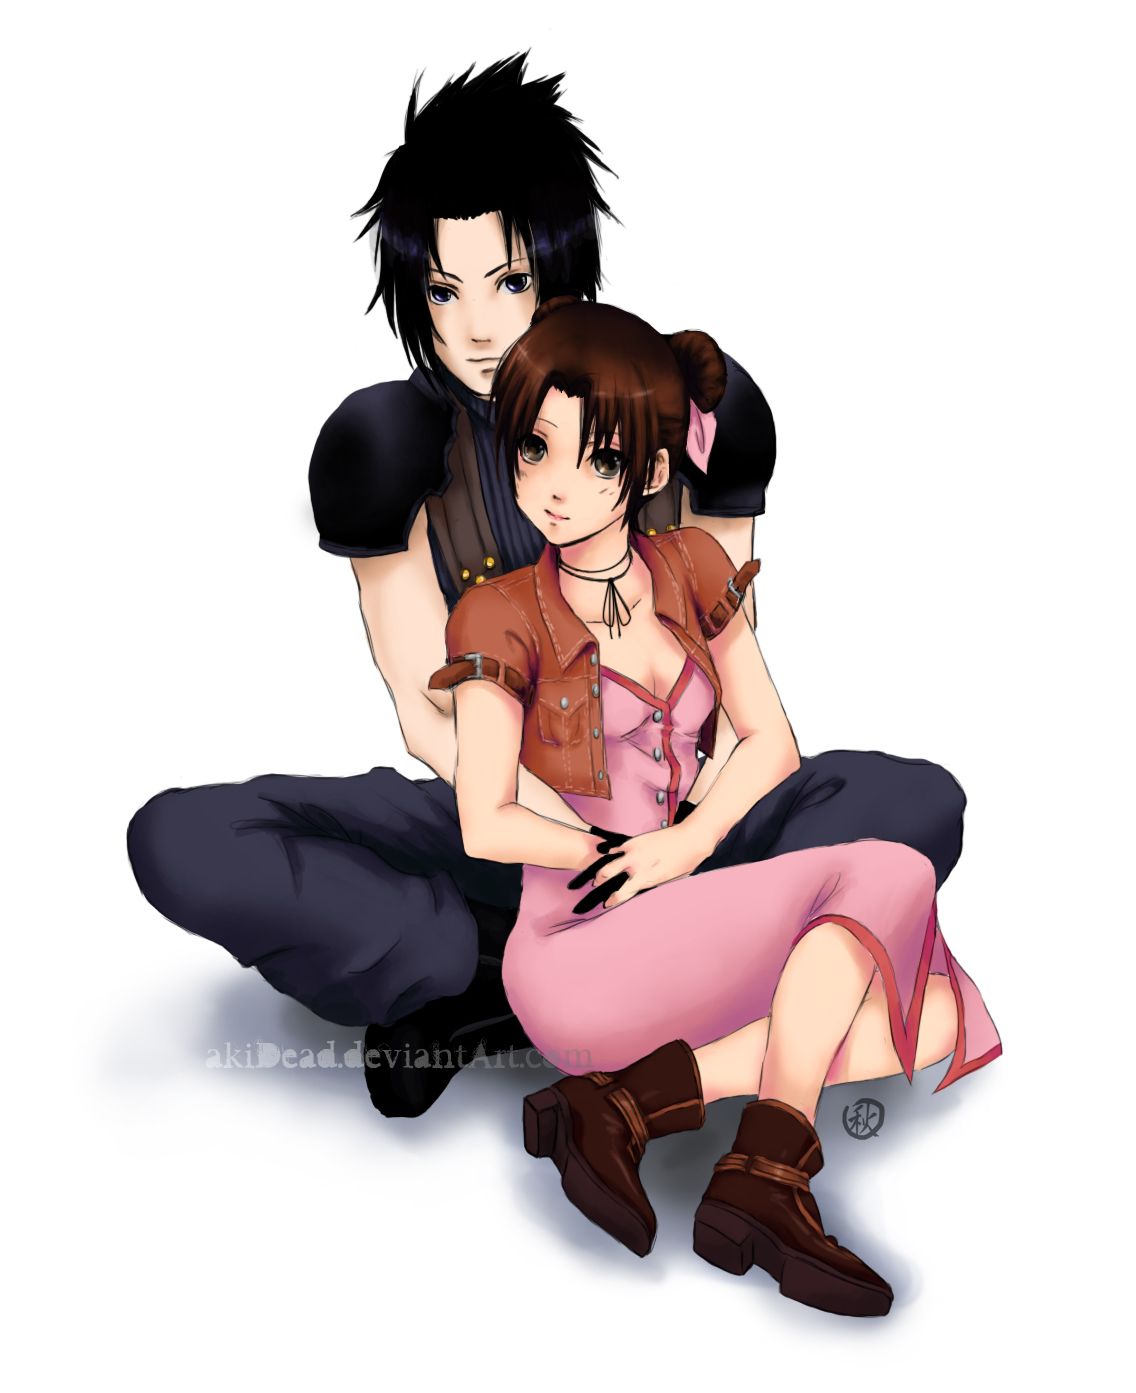 Sasuke and Tenten by AkiDead on Deviant Art